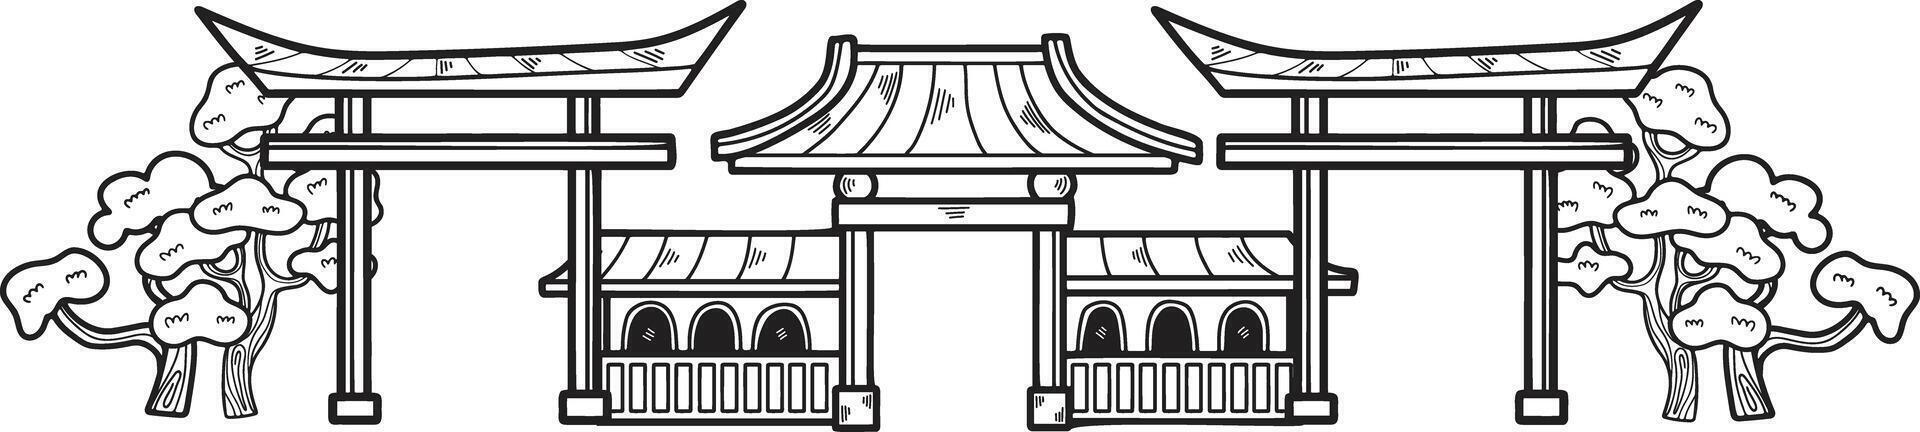 Hand Drawn Japanese and Chinese style pavilions or pagodas in flat style vector